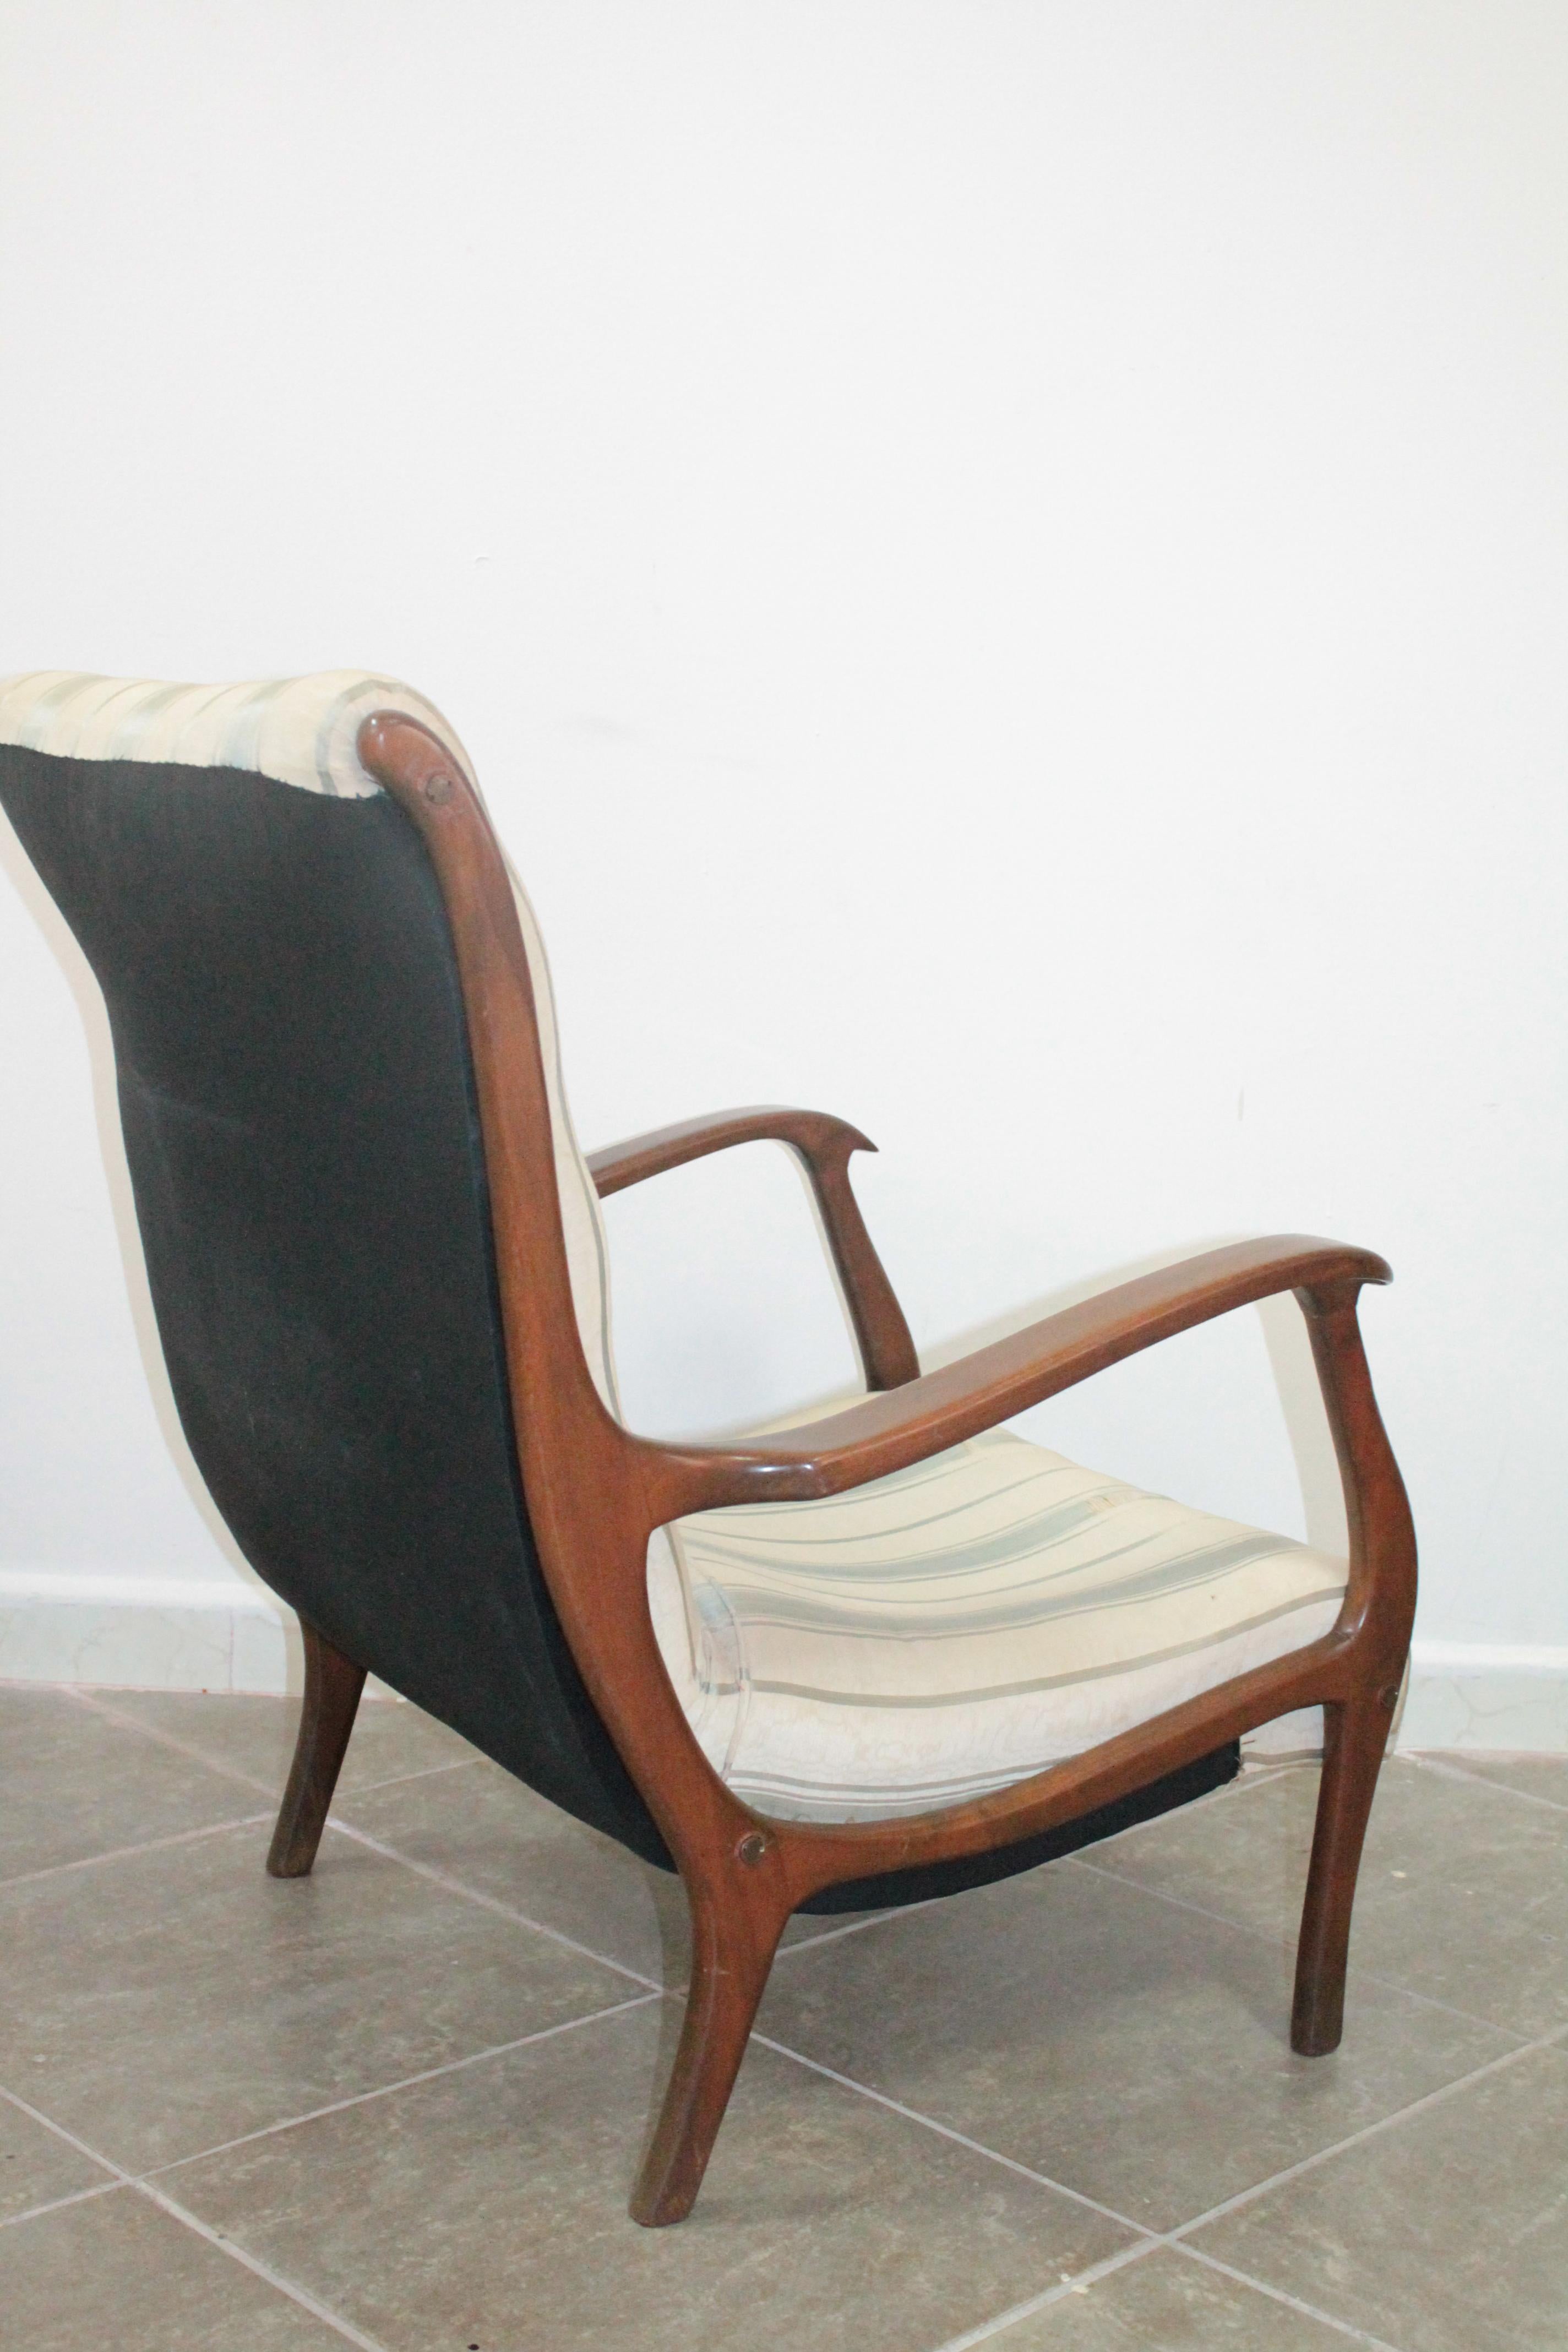 Italian Vintage Ezio Longhi for Elam Lounge Chairs Wood, 1950s For Sale